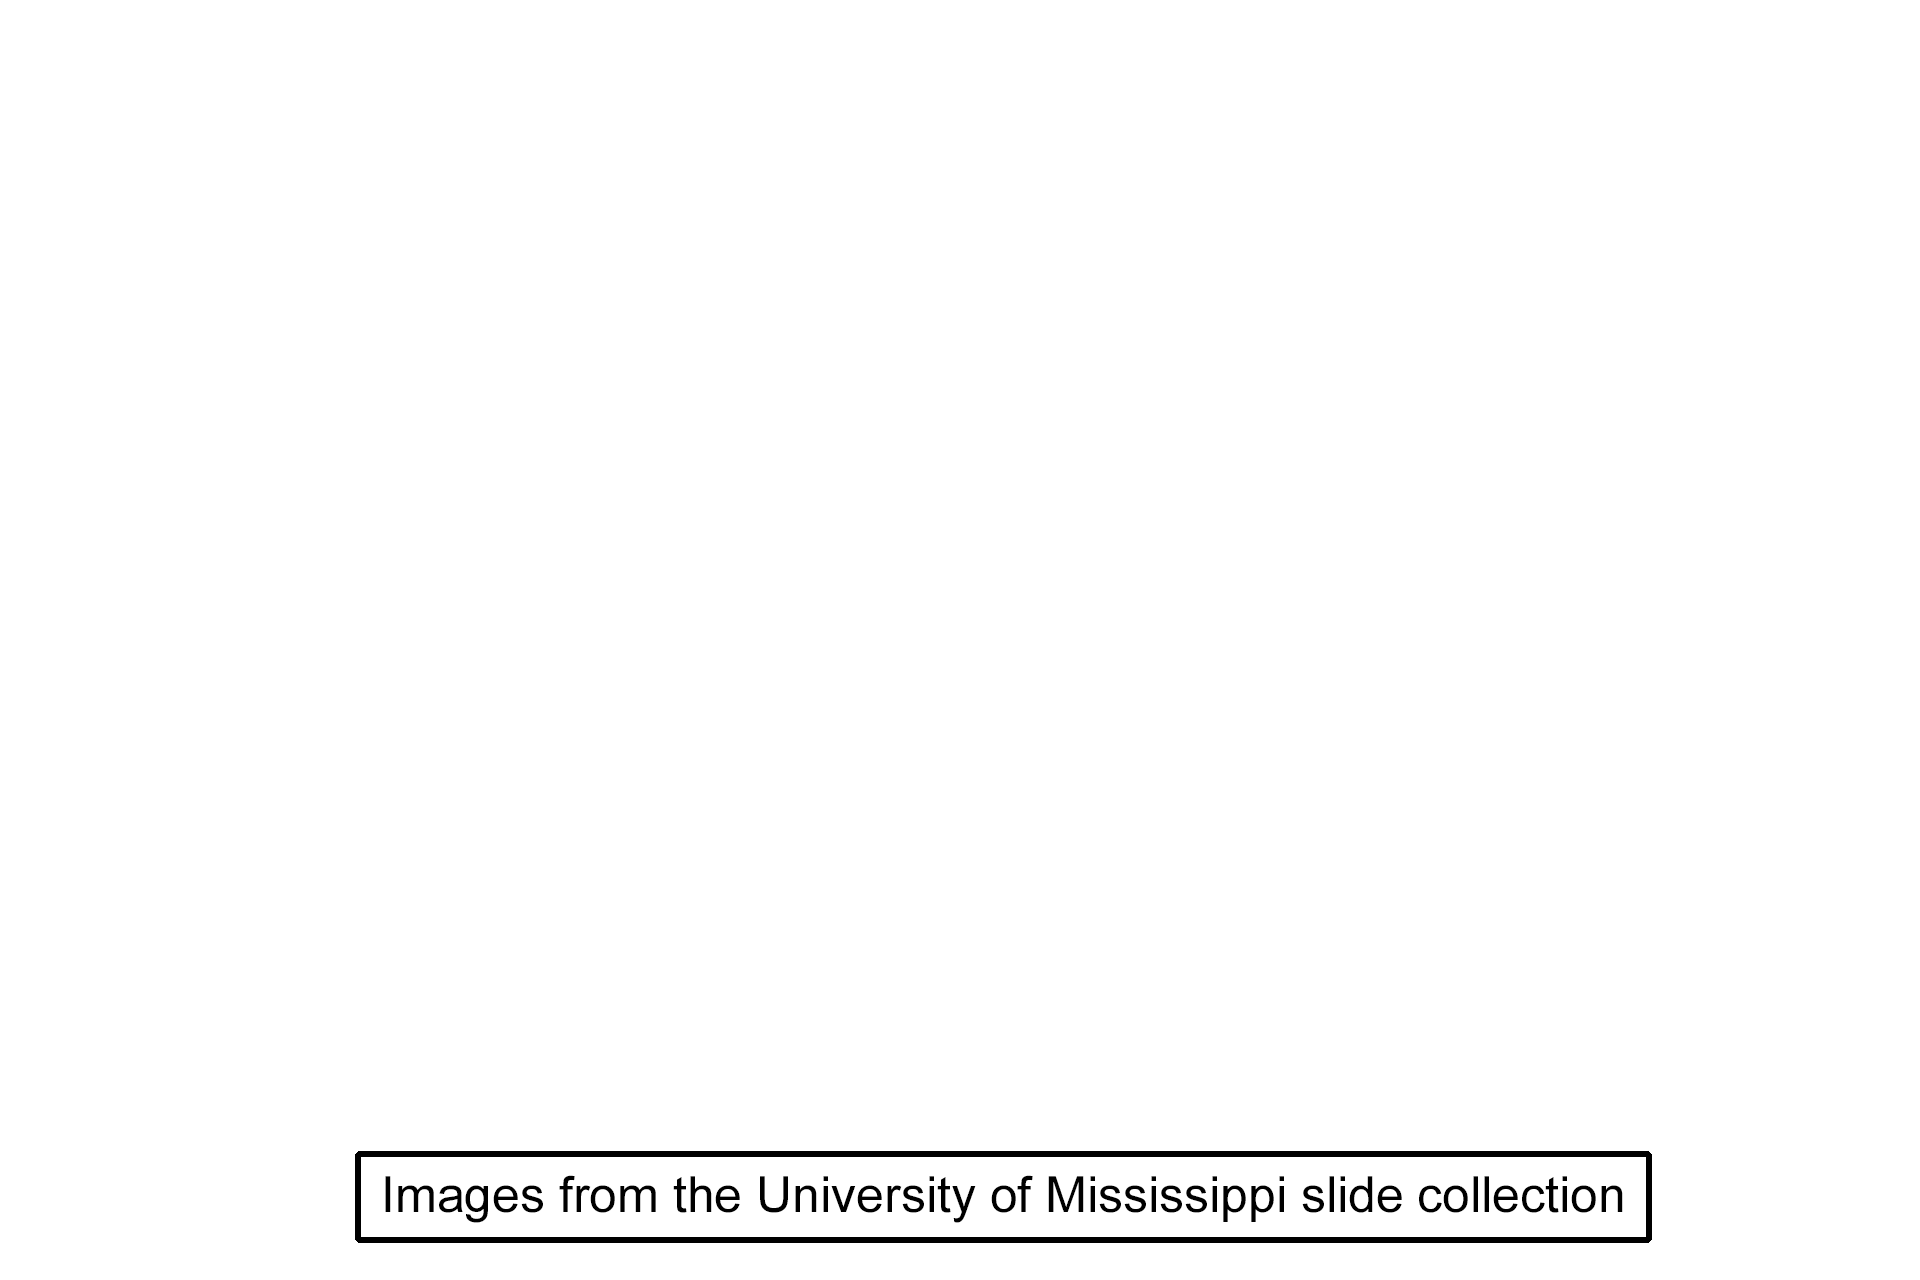 Image source > <p>These images were taken of a slide from the University of Mississippi slice collection.</p>
